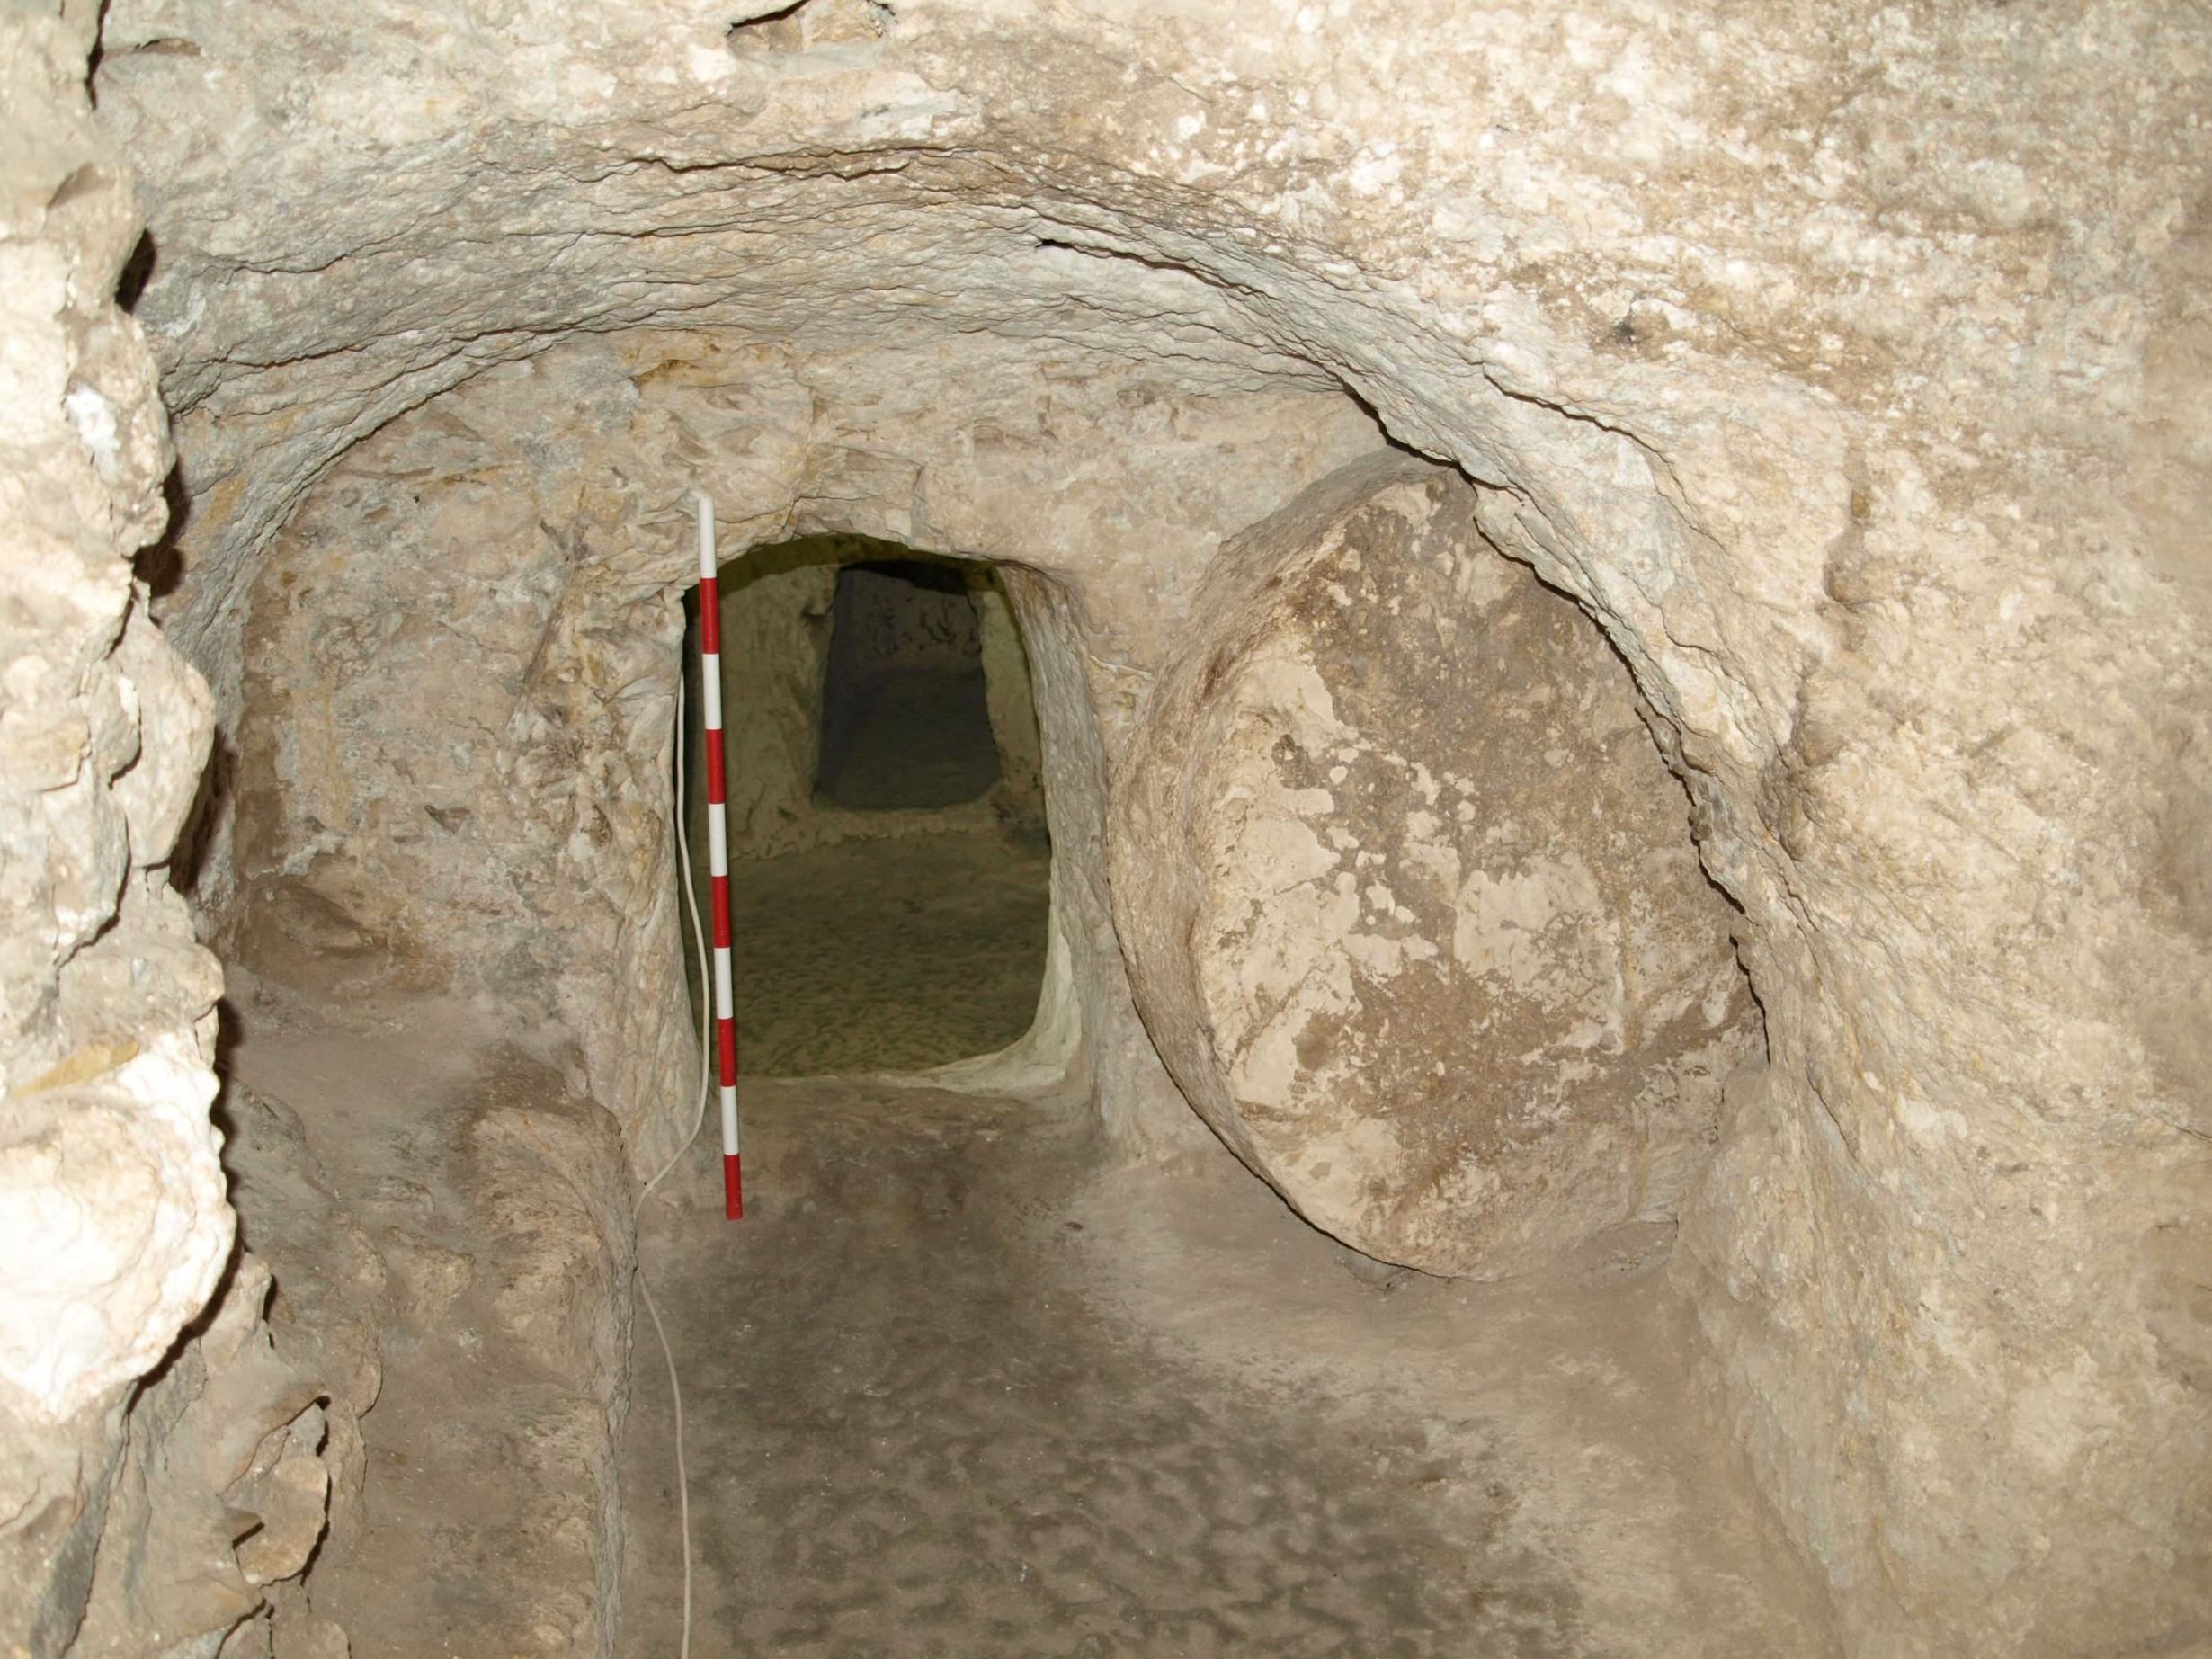 Probably shortly after the fall of Jerusalem to the Romans in AD70, a top priestly family chose to live in Nazareth. This first-century-style rock-cut tomb very near Nazareth (and similar to ones near Jerusalem) may well have been the final resting place of one of those priests